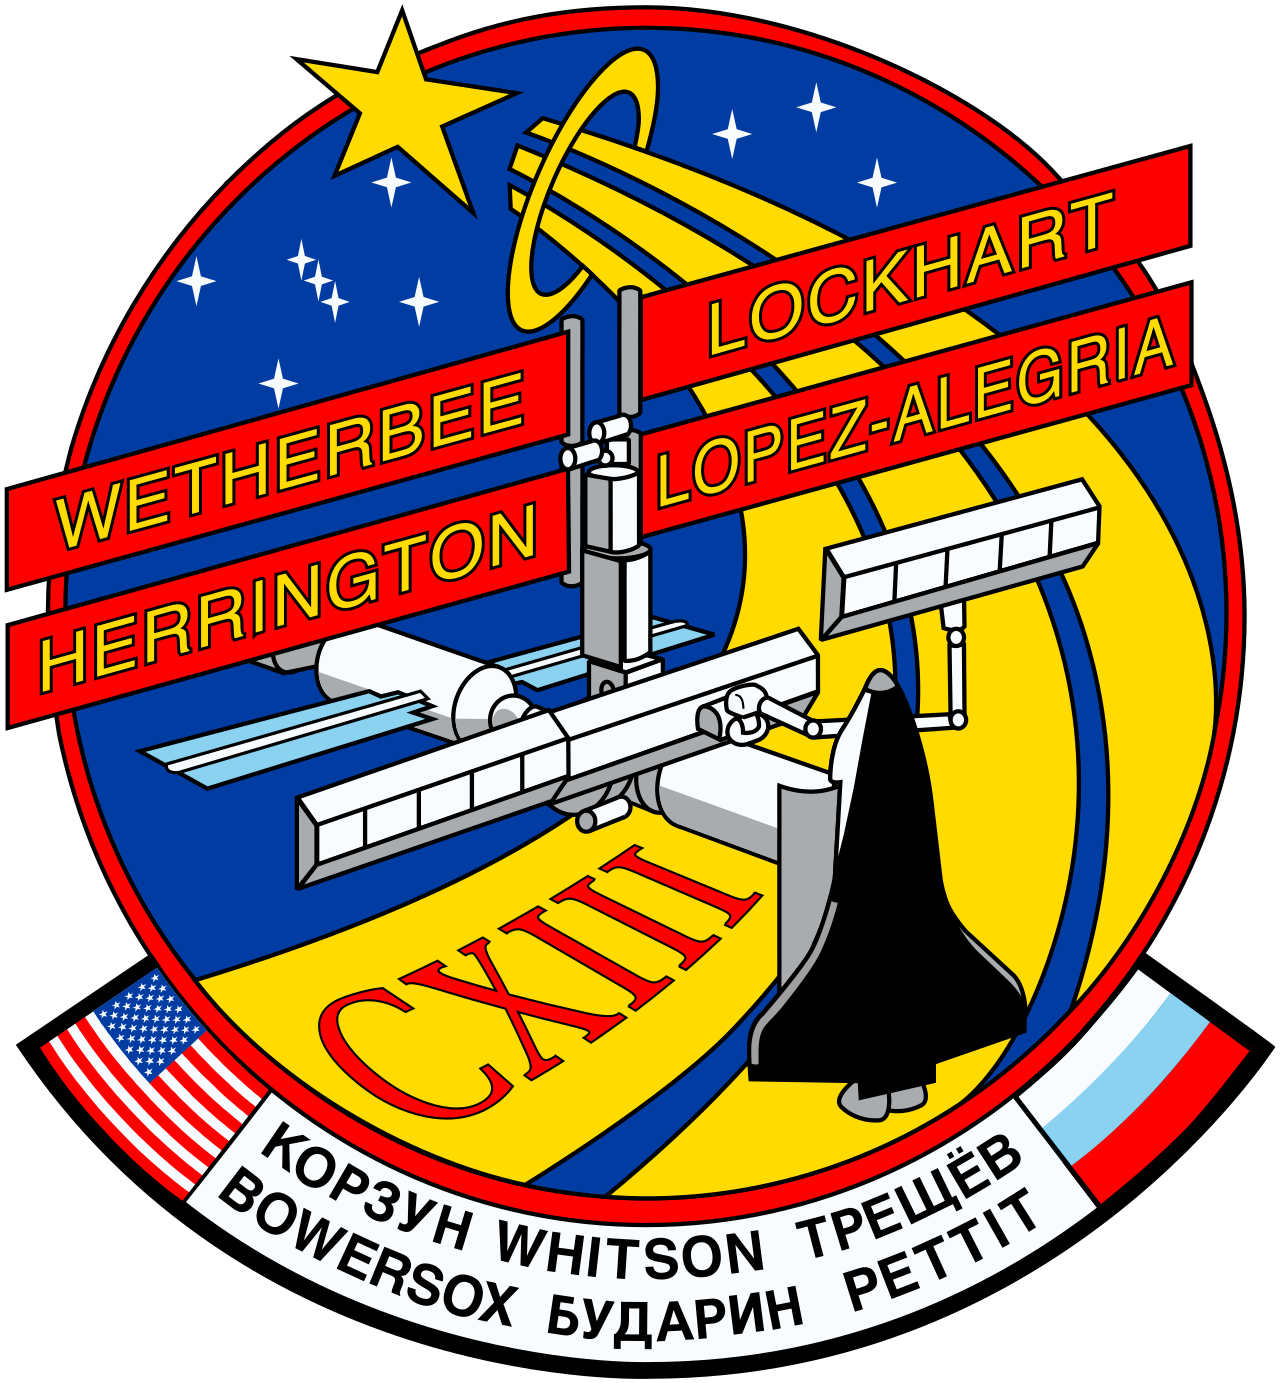 Mission patch for STS-113